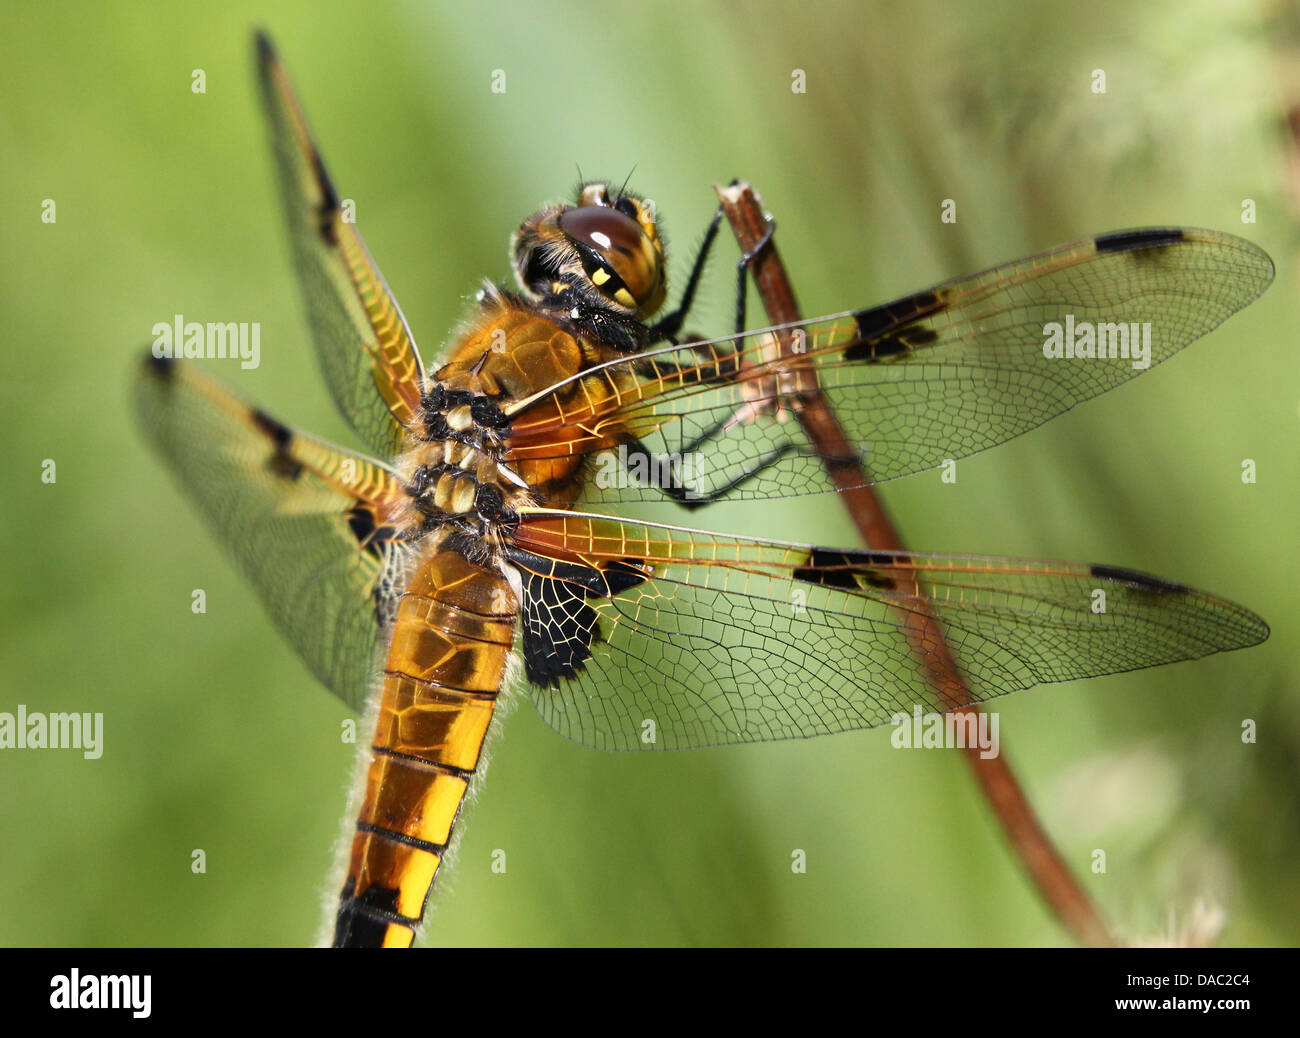 Detailed macro image of a Four-spotted Chaser (Libellula quadrimaculata)  dragonfly Stock Photo